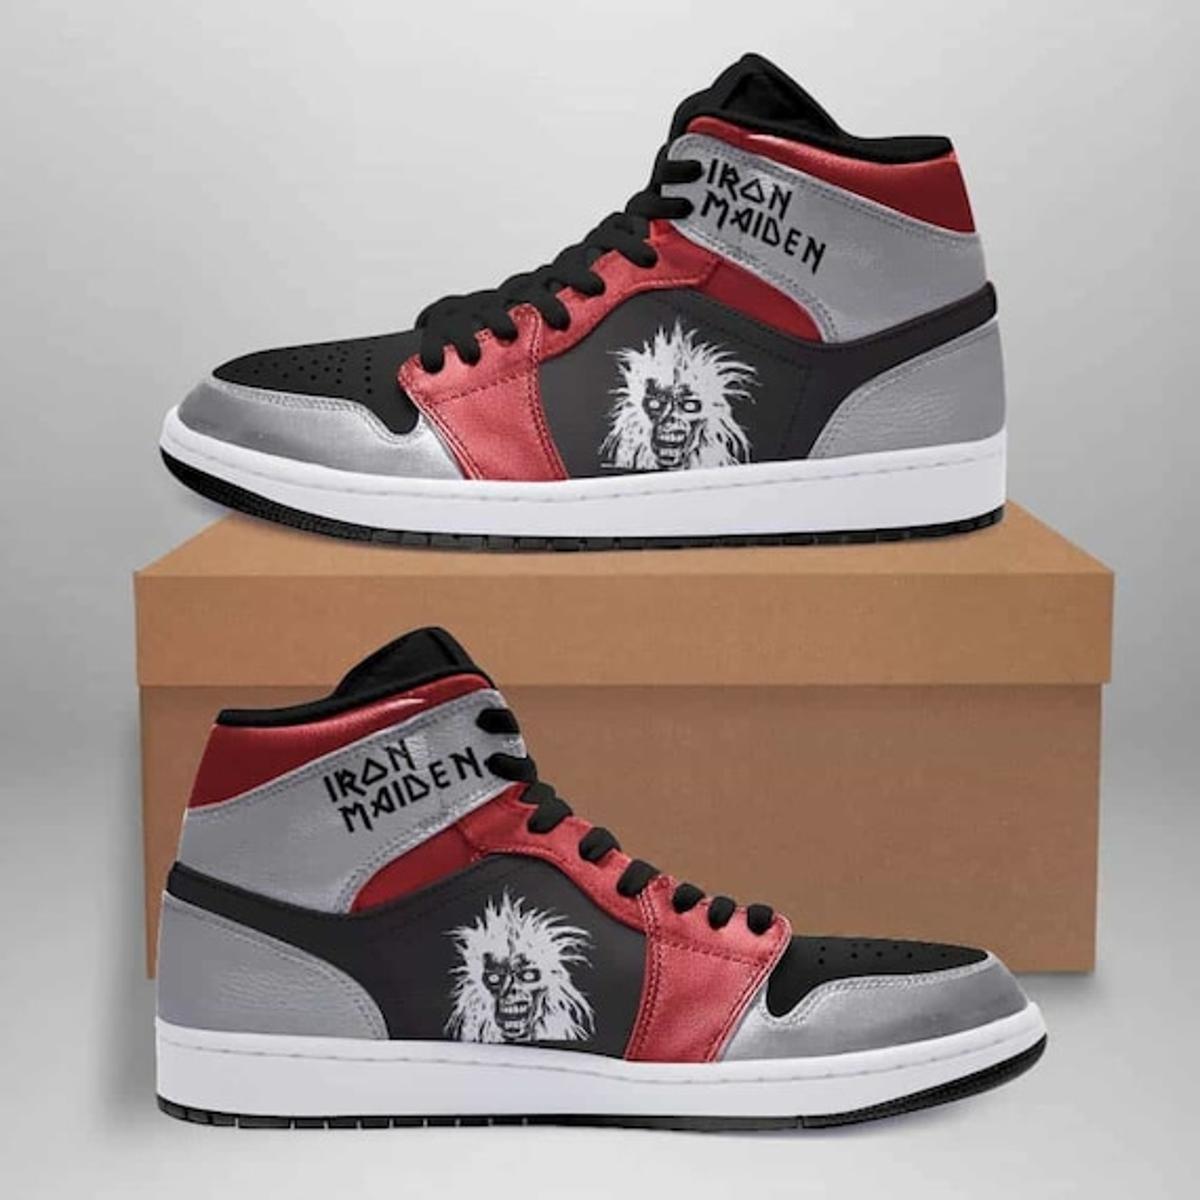 Iron Maiden Red Black Air Jordan 1 High Sneakers For Fans